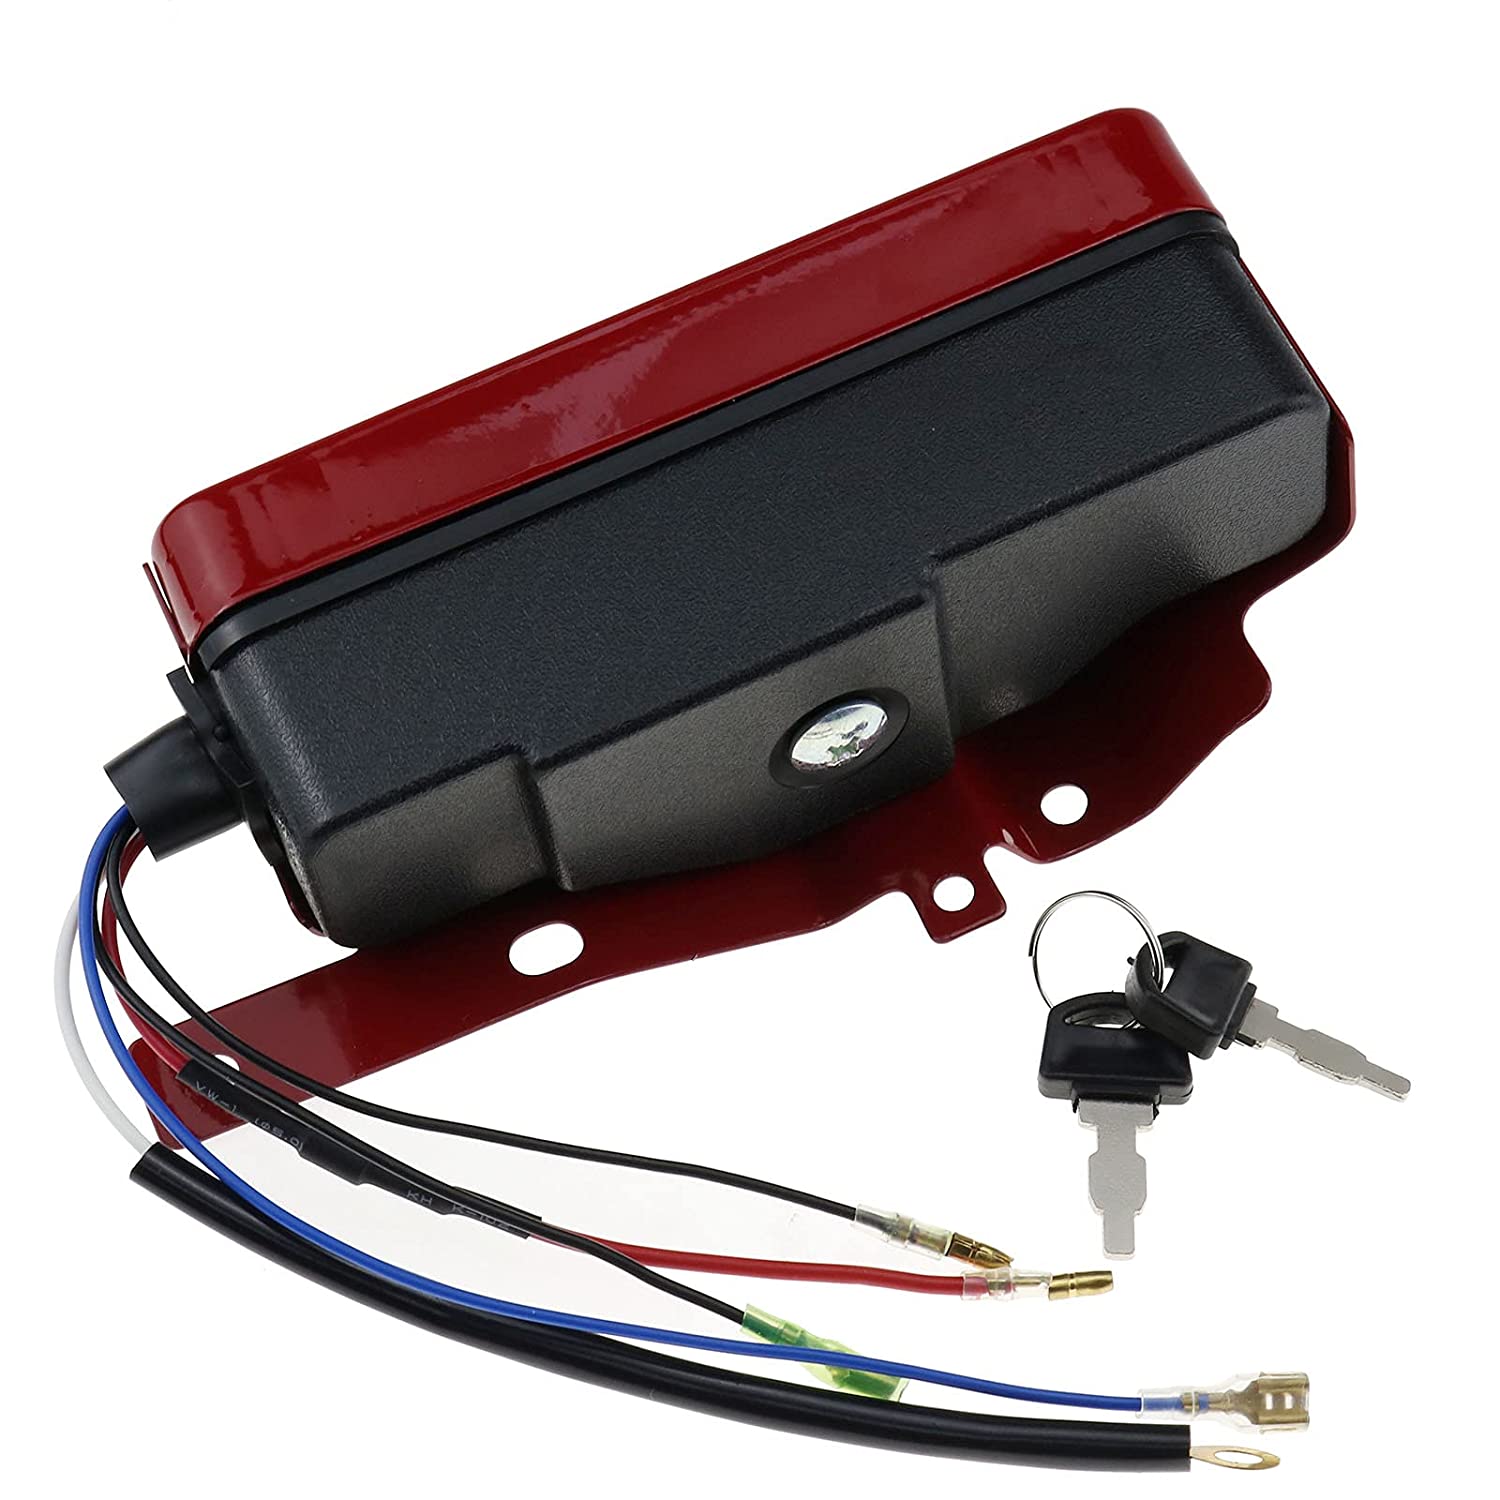 Electric Ignition Switch Panel Control Box with Keys Start Run Off Compatible with Honda GX240 GX270 GX340 GX390 11HP 13HP 15HP 16HP Engines - KUDUPARTS